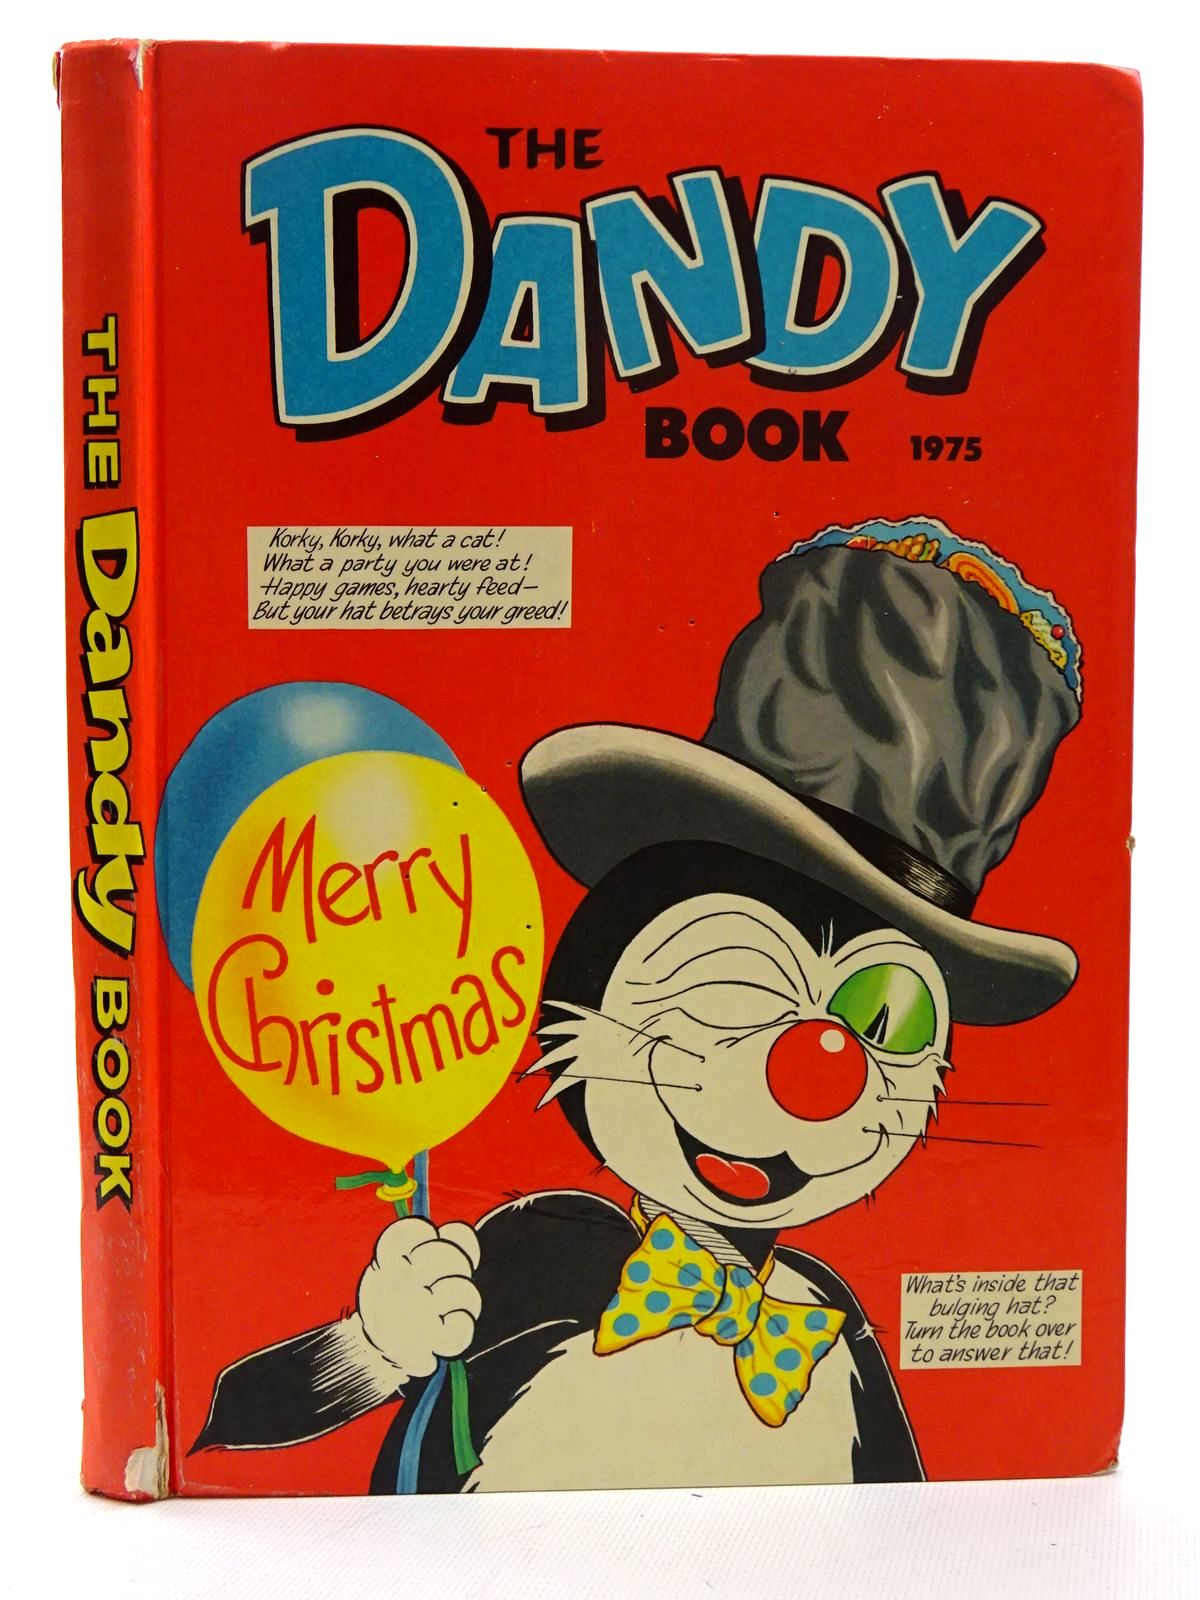 Photo of THE DANDY BOOK 1975 published by D.C. Thomson &amp; Co Ltd. (STOCK CODE: 1610507)  for sale by Stella & Rose's Books